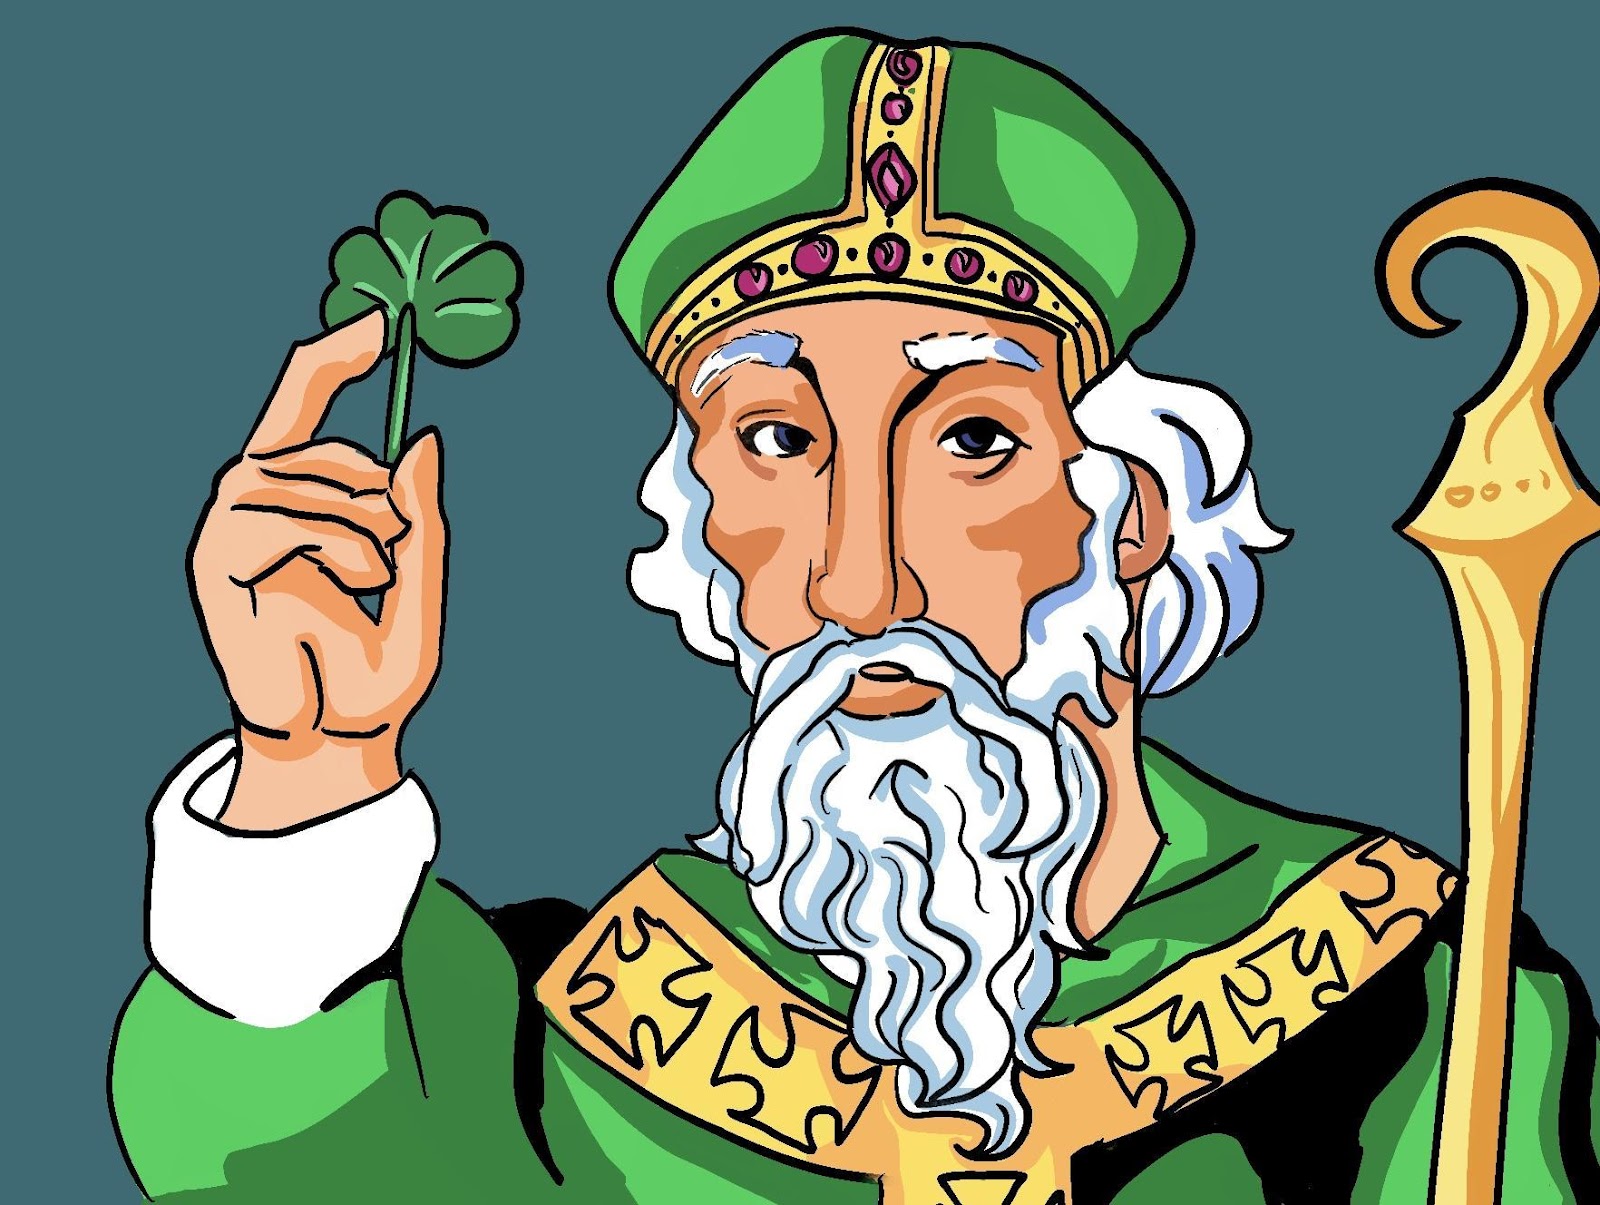 The history and celebration of St. Patrick’s Day